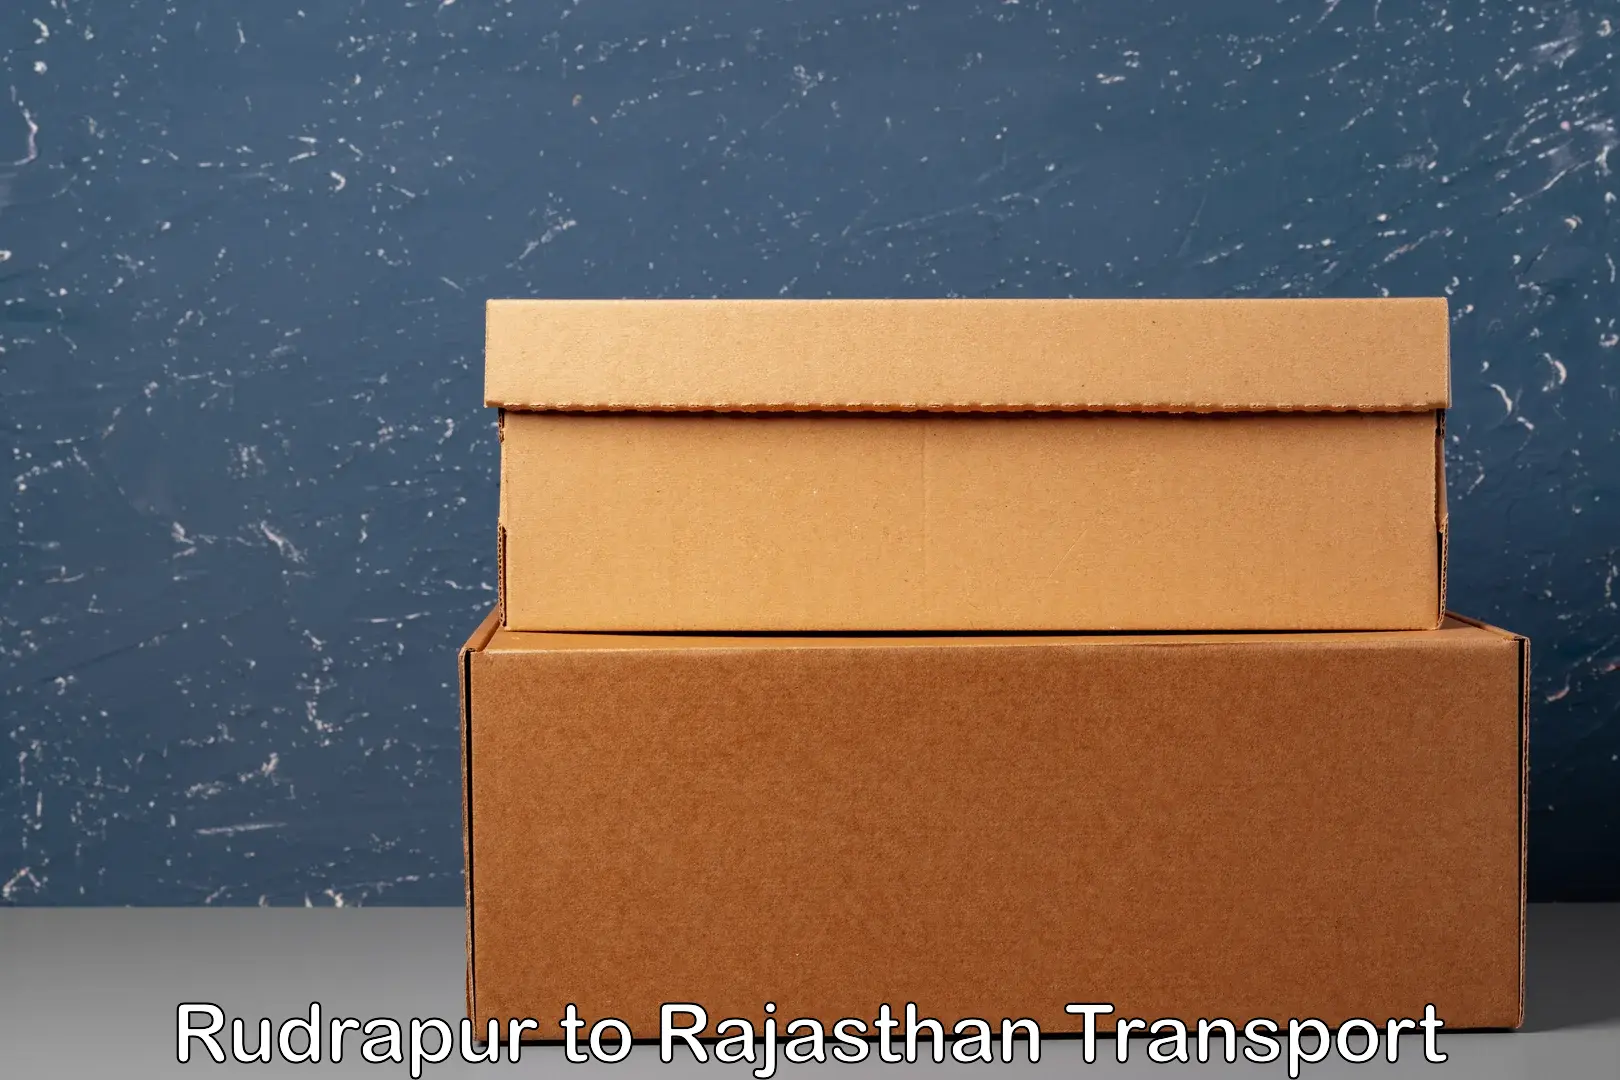 Air freight transport services Rudrapur to Rajasthan